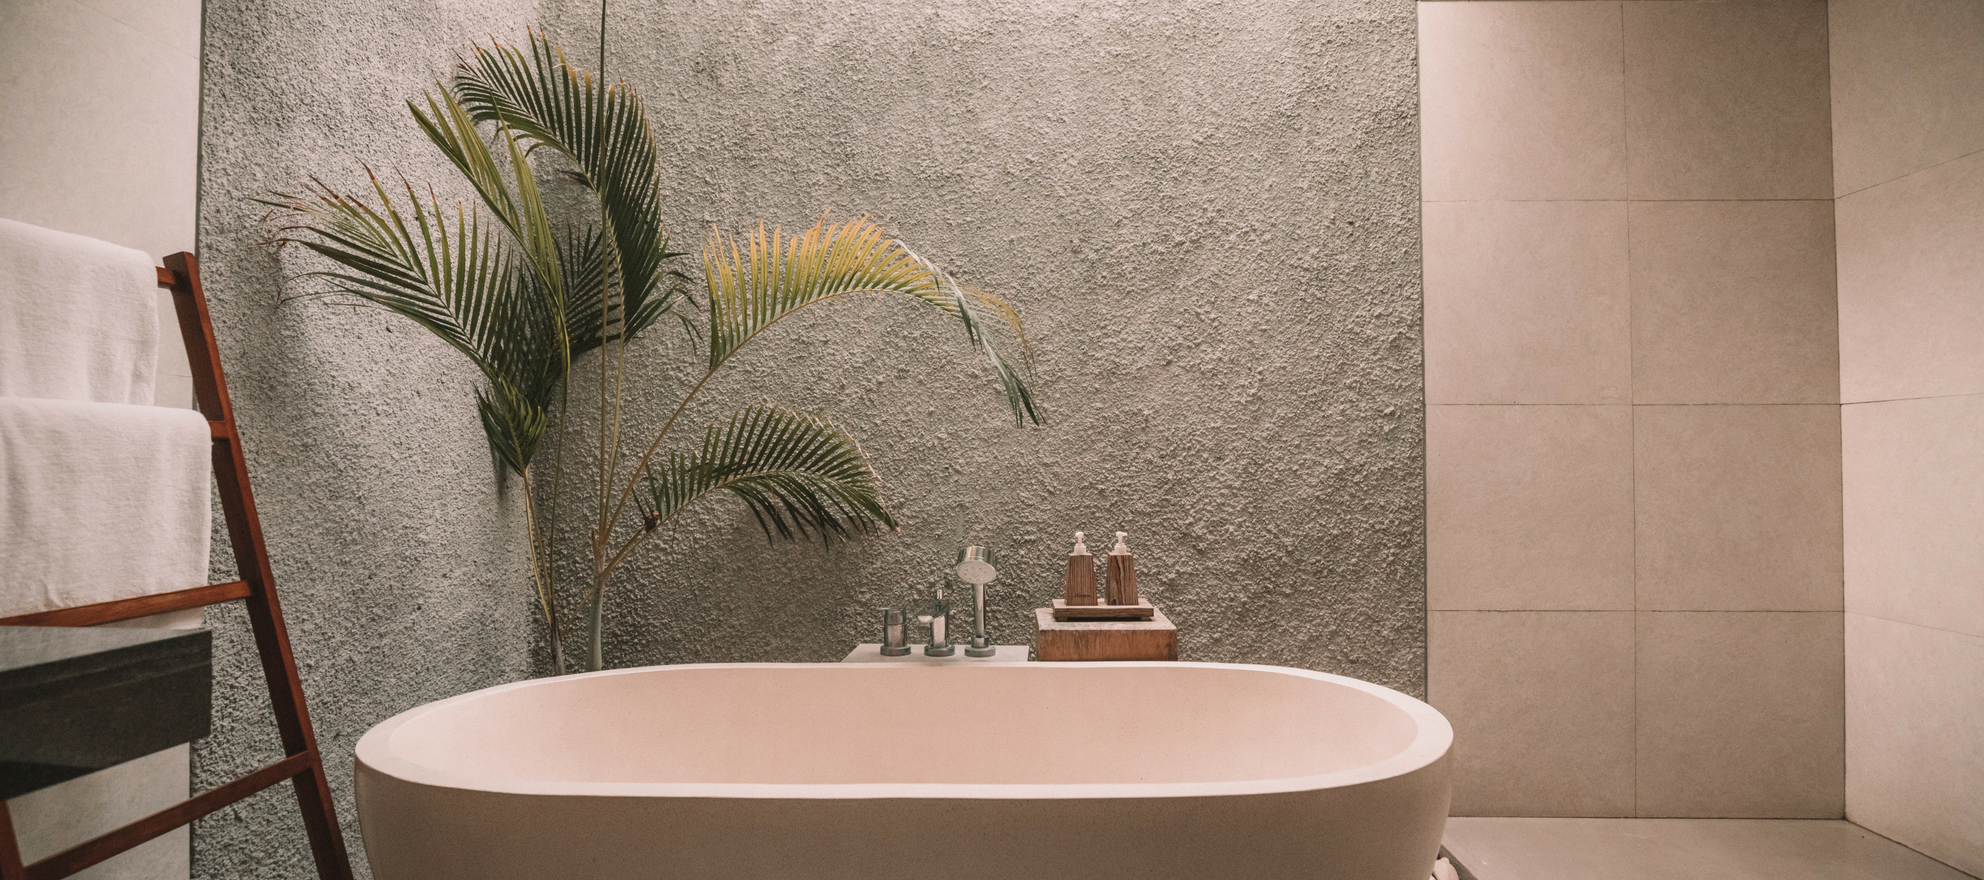 Pros And Cons Of 9 Bathtub Materials, Porcelain On Steel Bathtubs